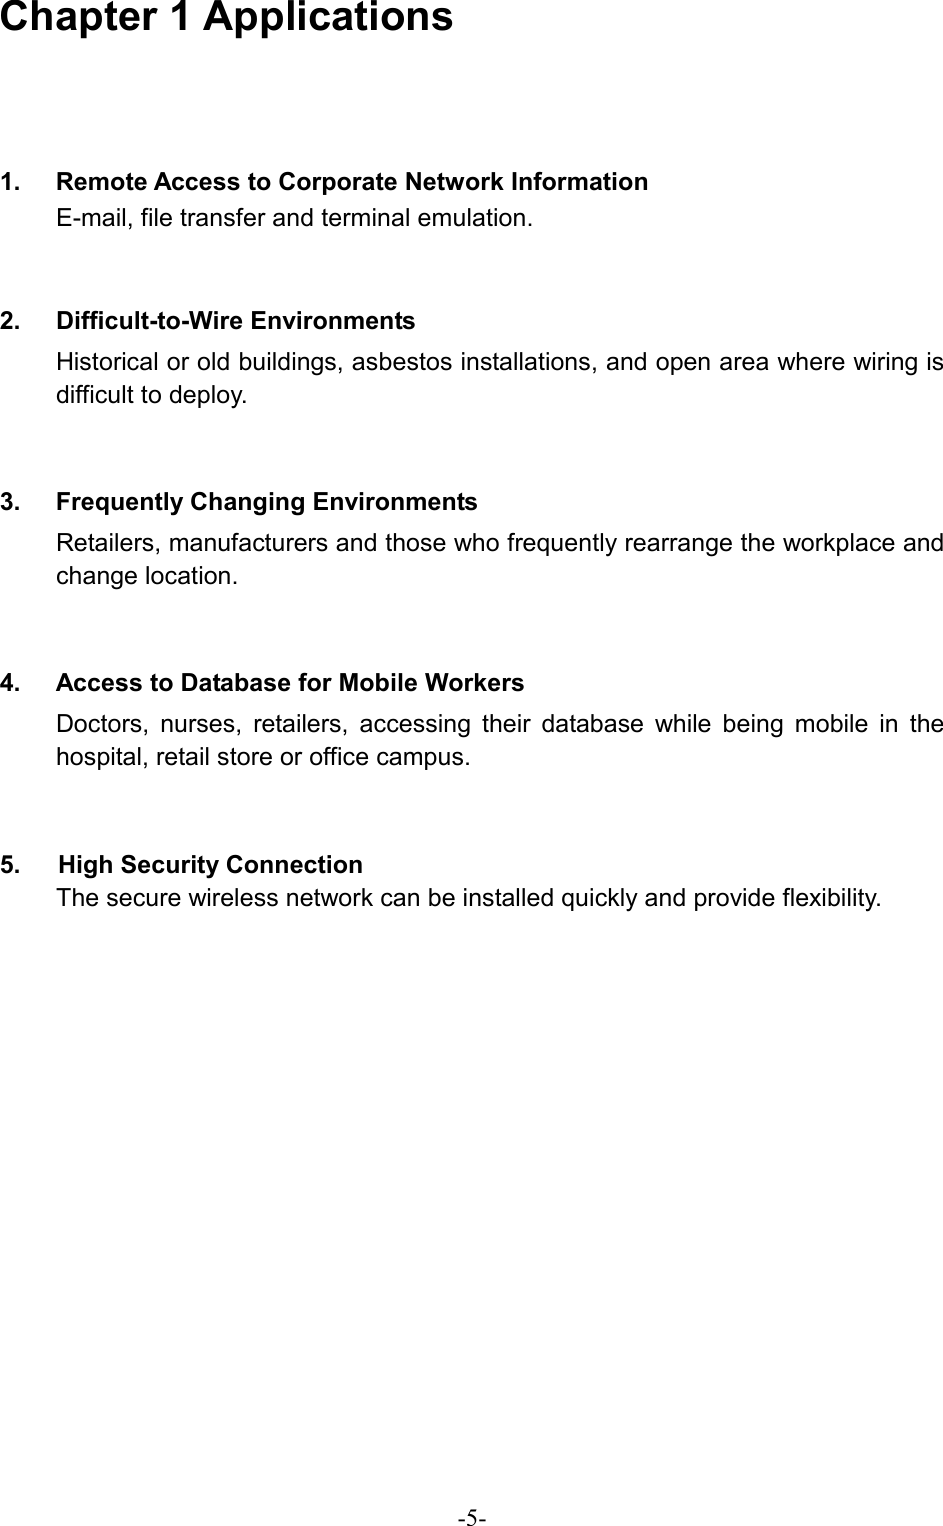  -5-Chapter 1 Applications     1.  Remote Access to Corporate Network Information E-mail, file transfer and terminal emulation.  2. Difficult-to-Wire Environments Historical or old buildings, asbestos installations, and open area where wiring is difficult to deploy.  3.  Frequently Changing Environments Retailers, manufacturers and those who frequently rearrange the workplace and change location.  4.  Access to Database for Mobile Workers Doctors, nurses, retailers, accessing their database while being mobile in the hospital, retail store or office campus.  5.   High Security Connection The secure wireless network can be installed quickly and provide flexibility.   